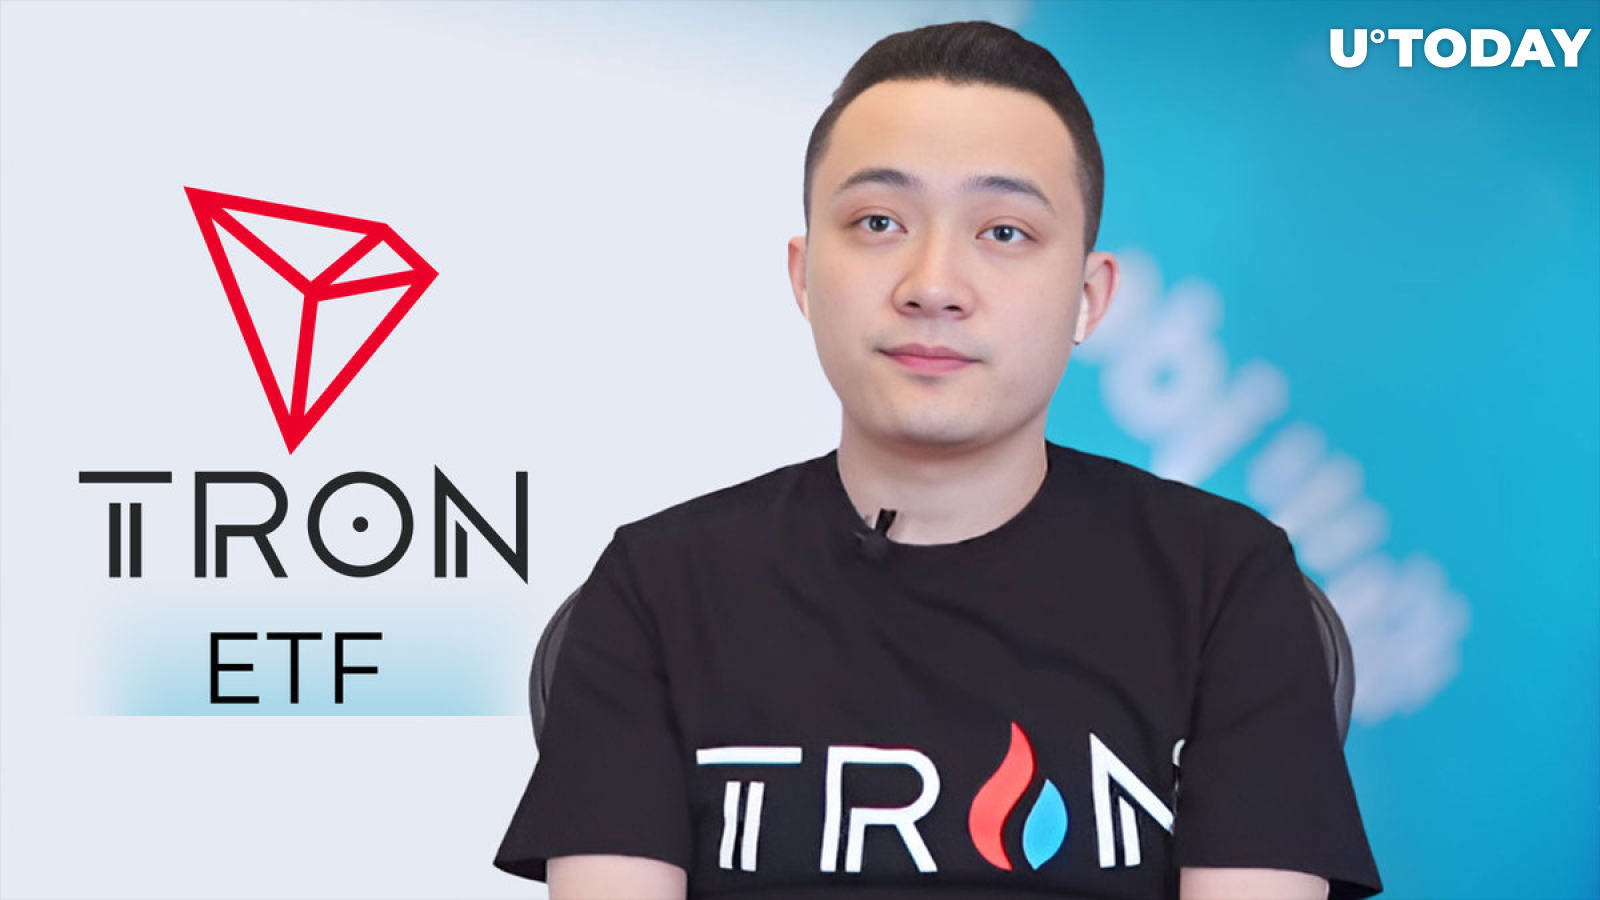 Tron Founder Justin Sun Sparks Community Intrigue With TRX ETF Post